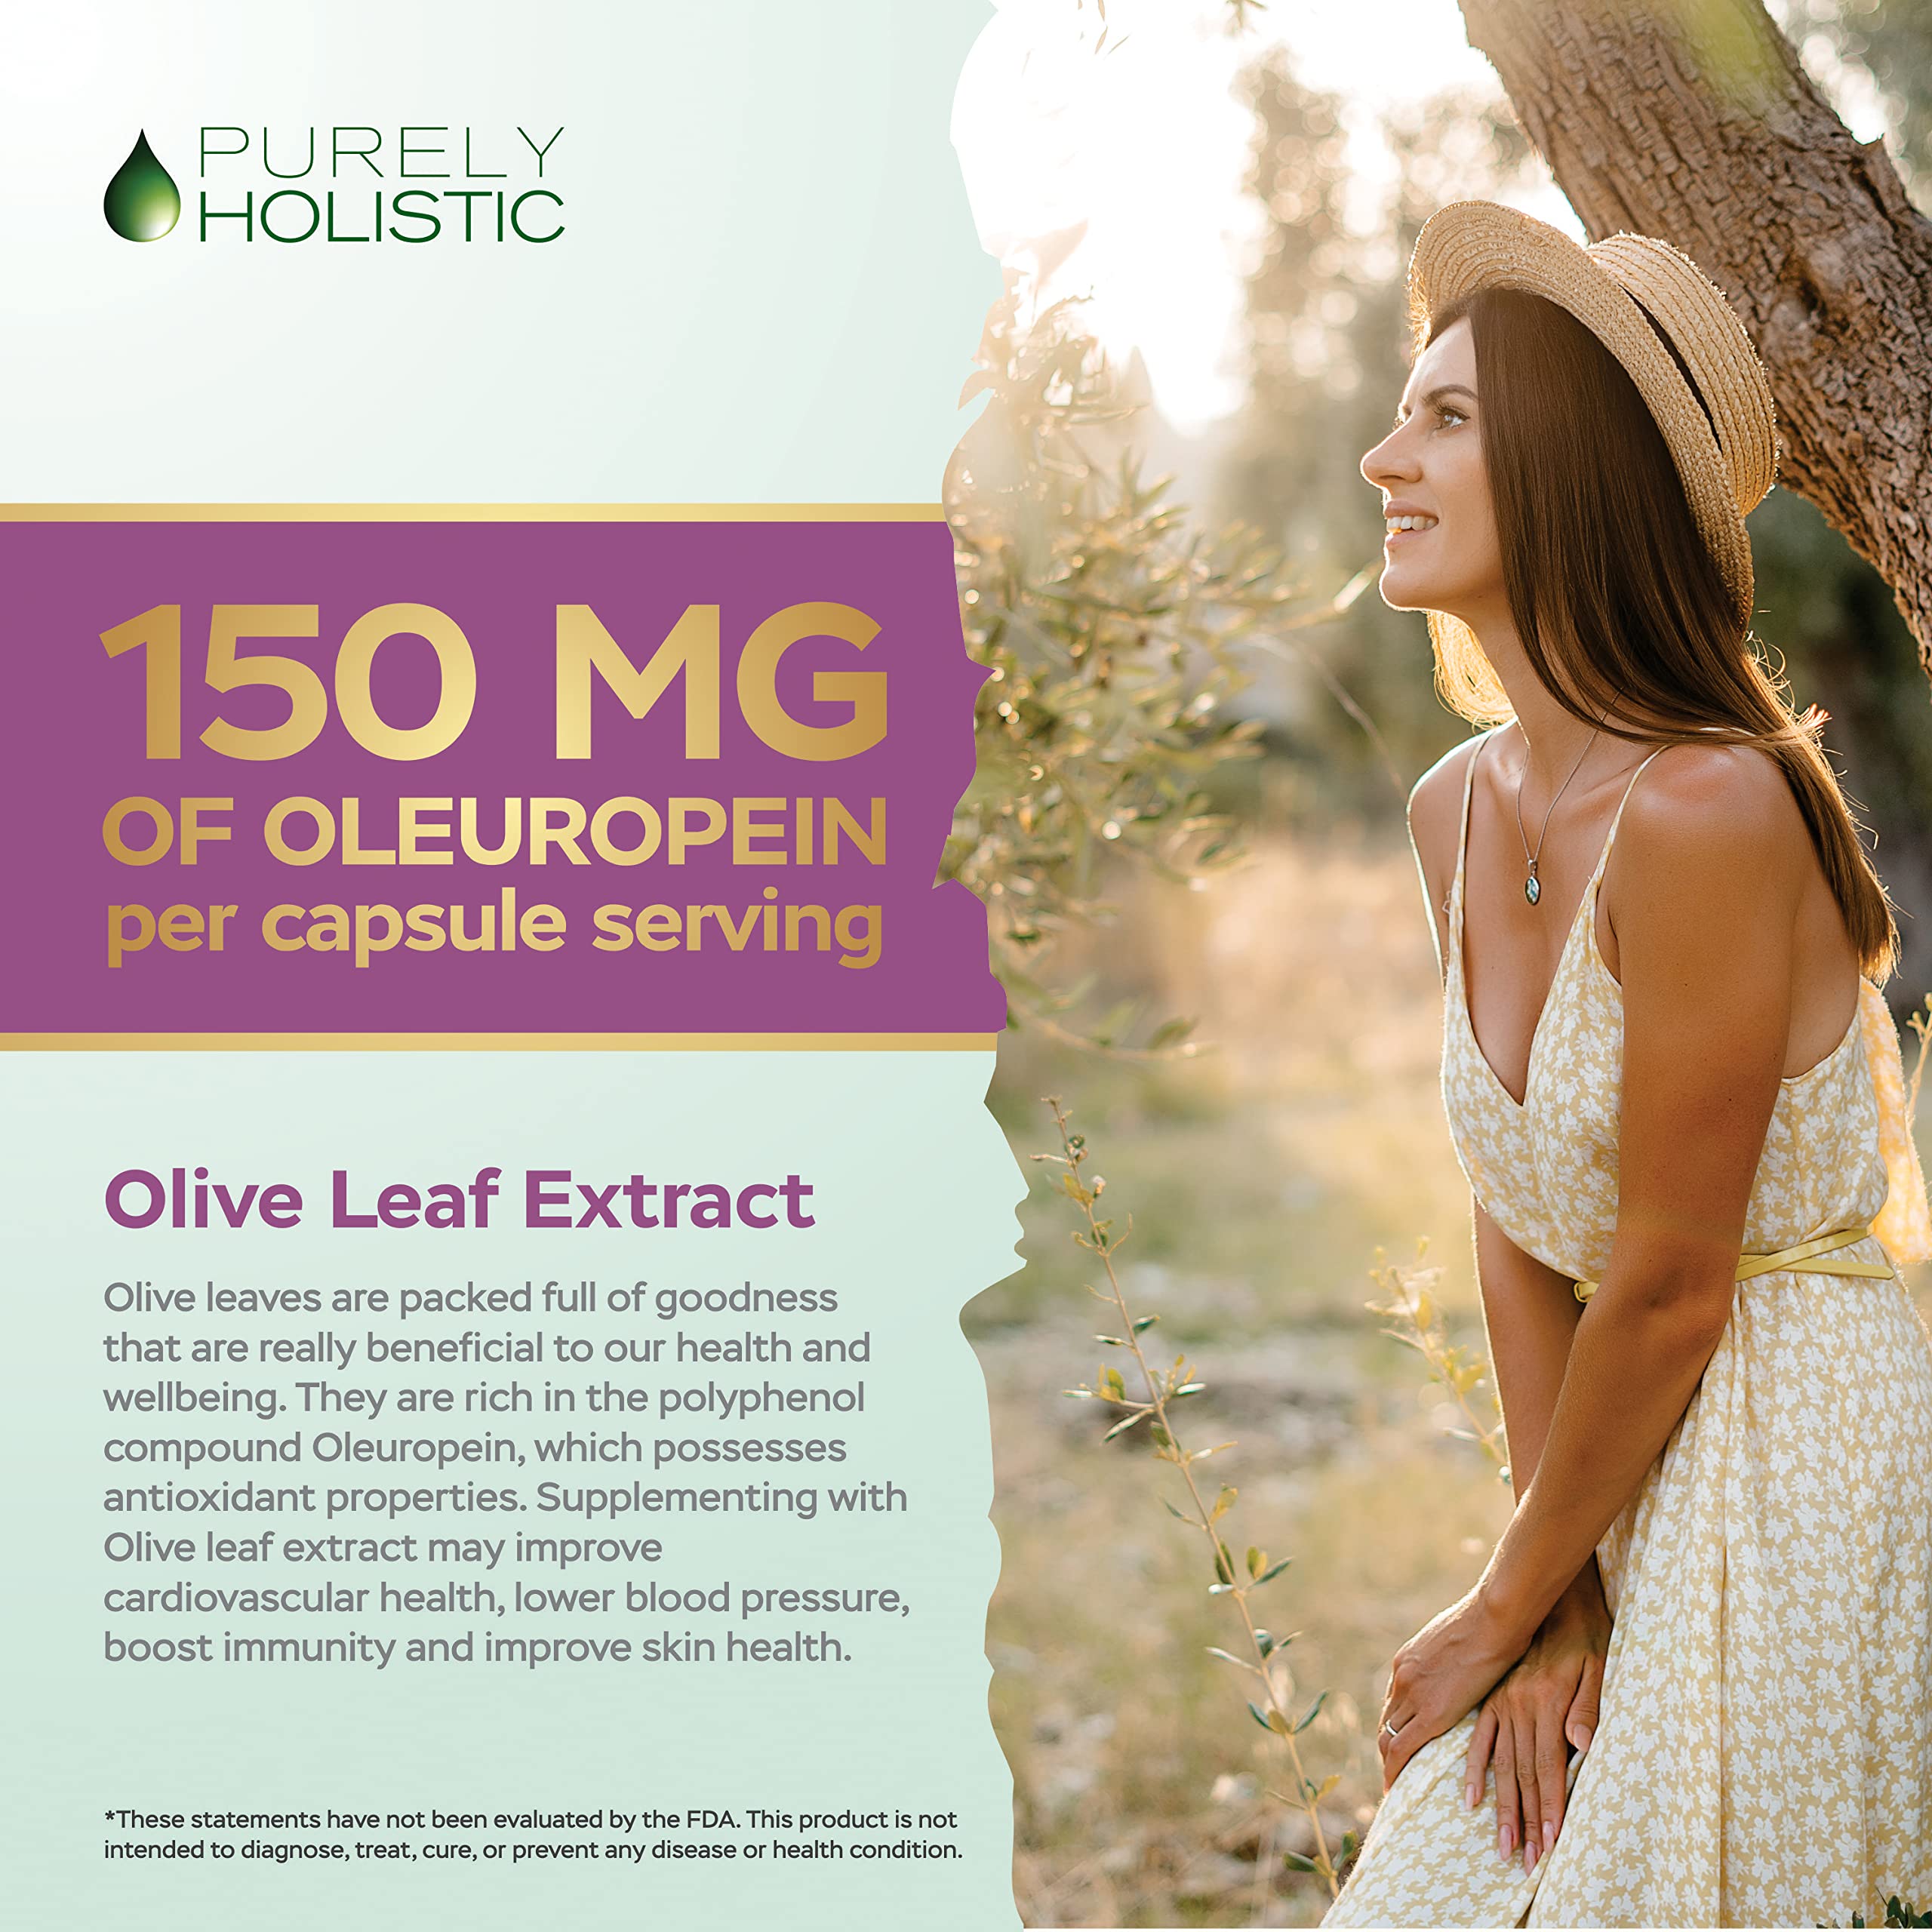 Purely Holistic Olive Leaf Extract 750mg (Non-GMO) Maximum Strength - 120 Vegan Capsules - 20% Oleuropein - 4 Month Supply - Immune System Support Supplement